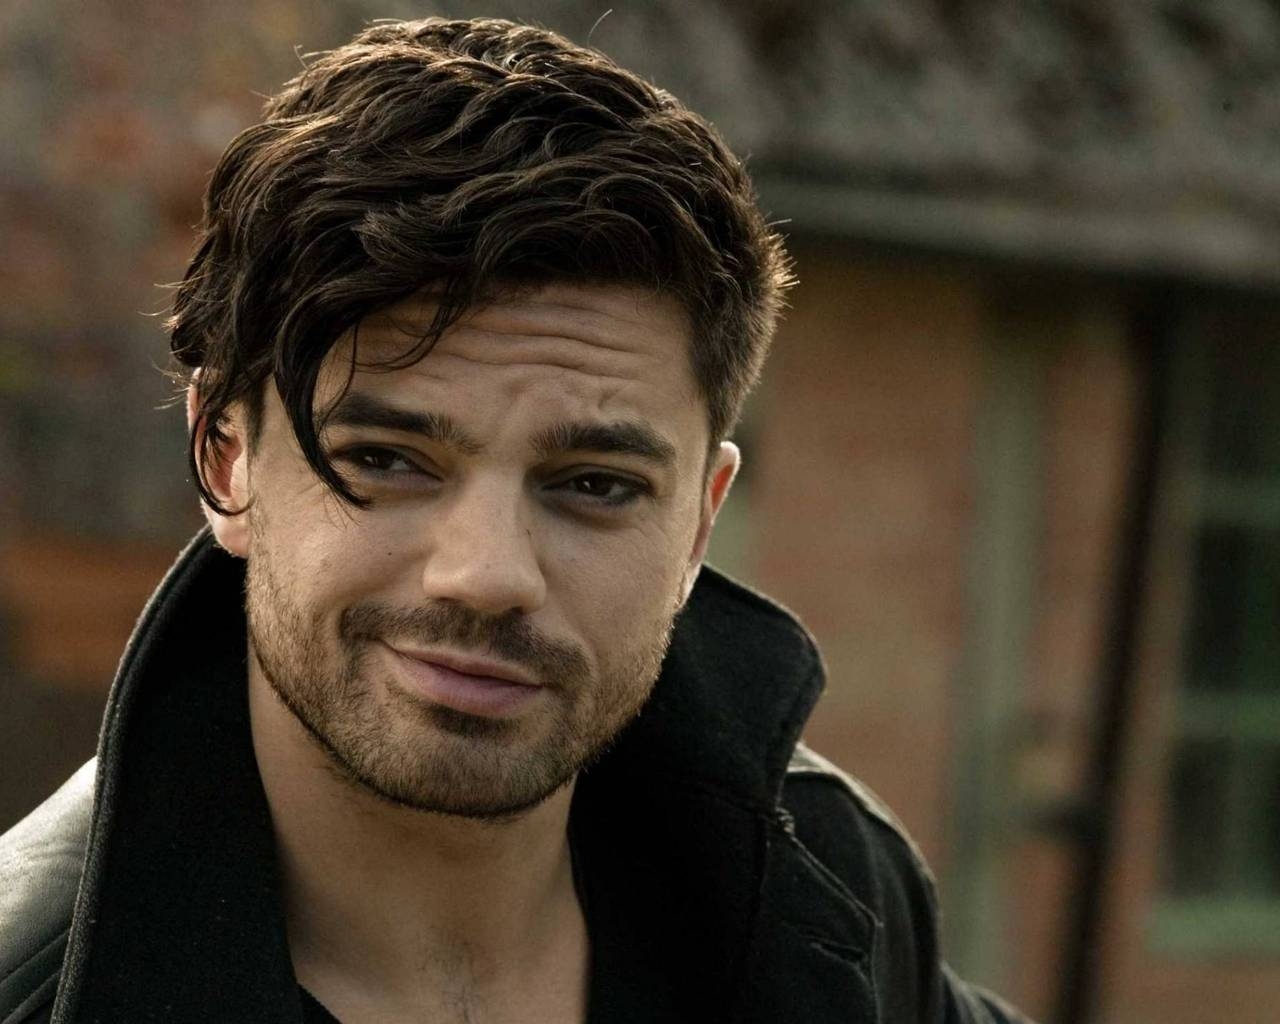 Dominic Cooper for 1280 x 1024 resolution